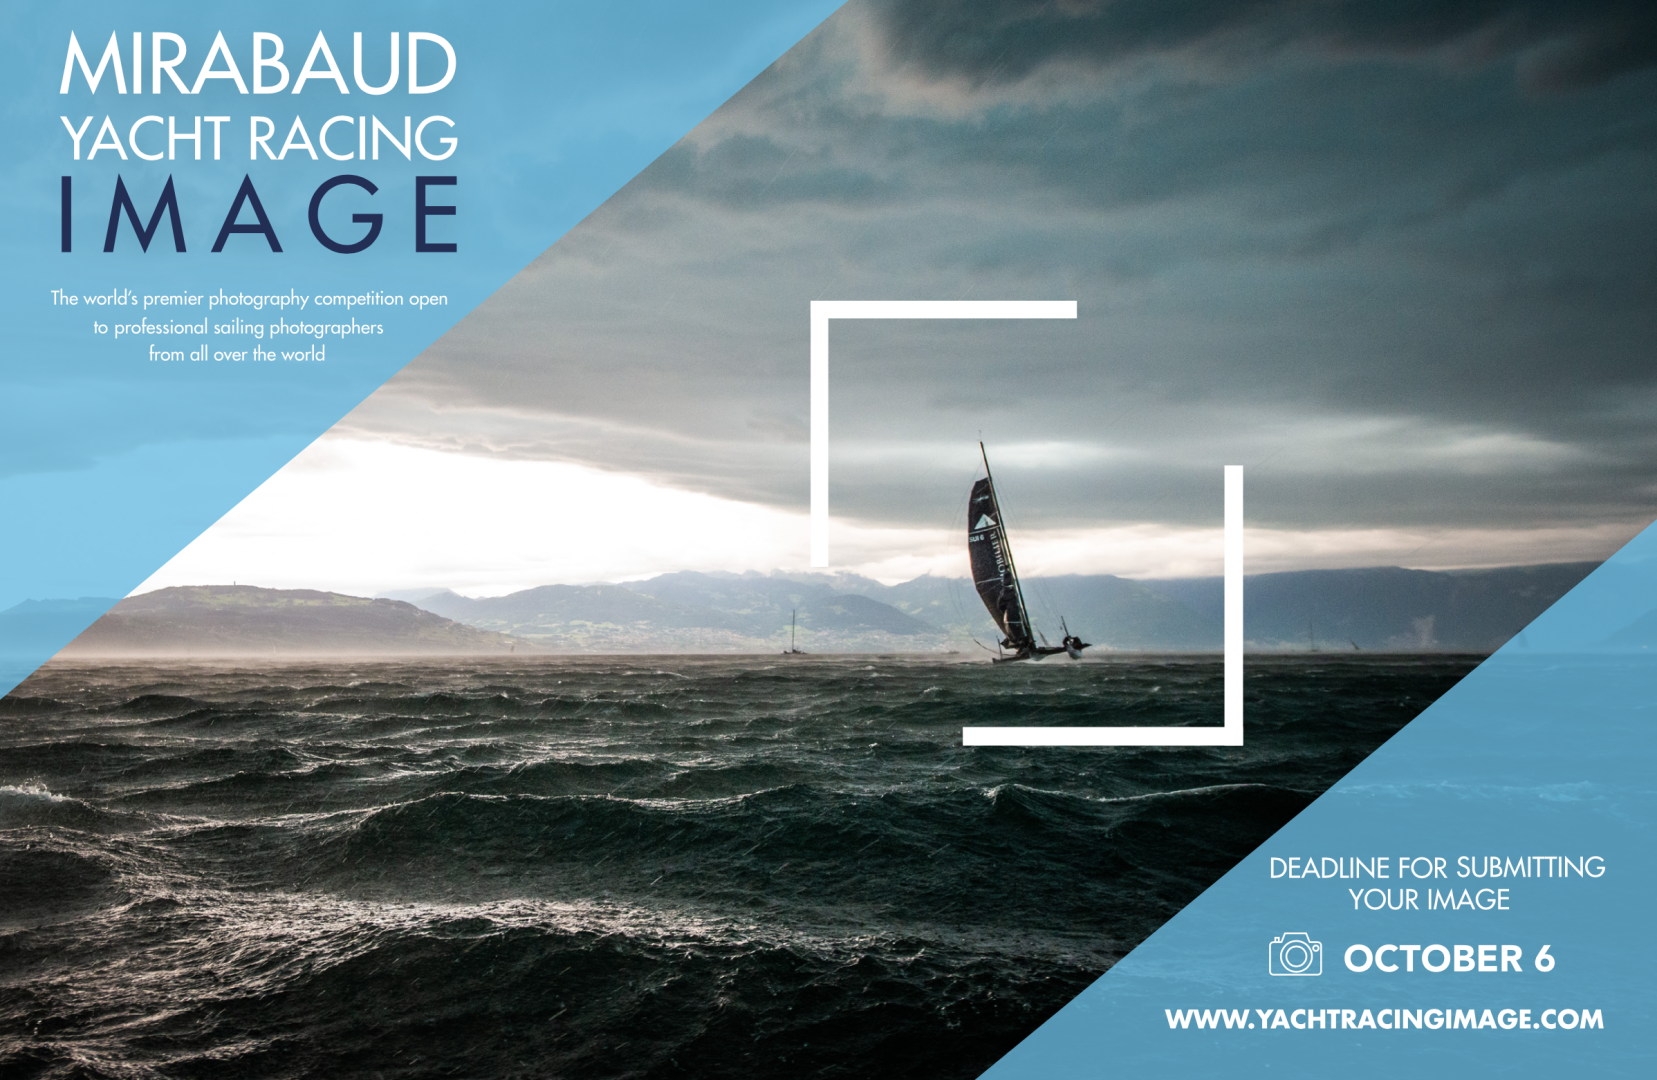 Mirabaud Yacht Racing Image of the Century photo contest is October 6